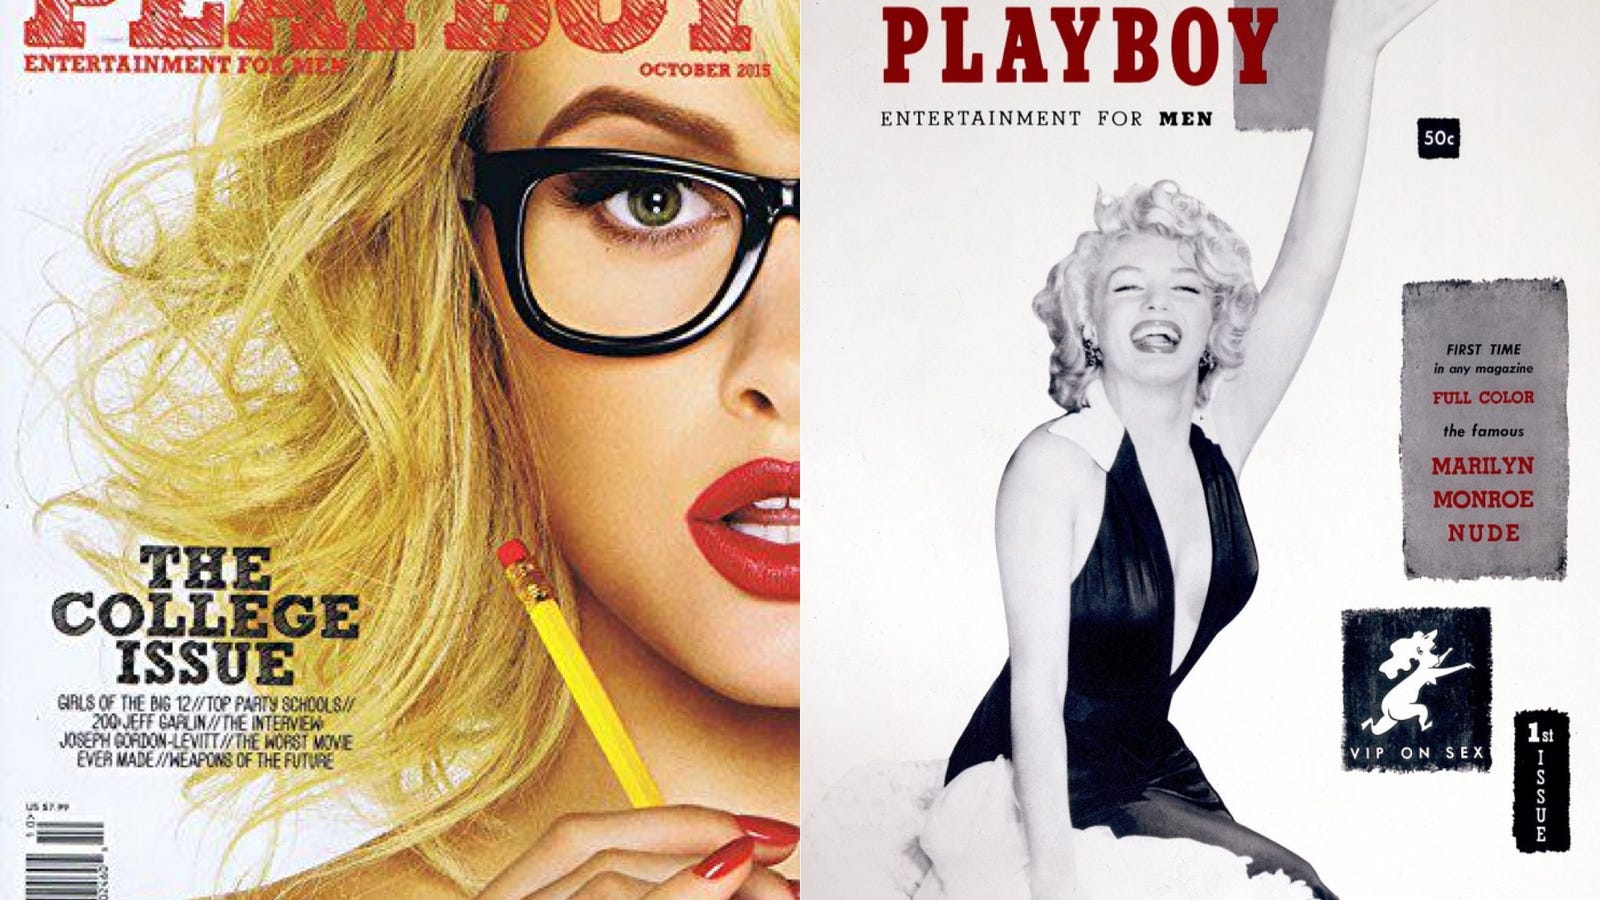 Playboy Magazine To No Longer Feature Nude Women The Economic Times